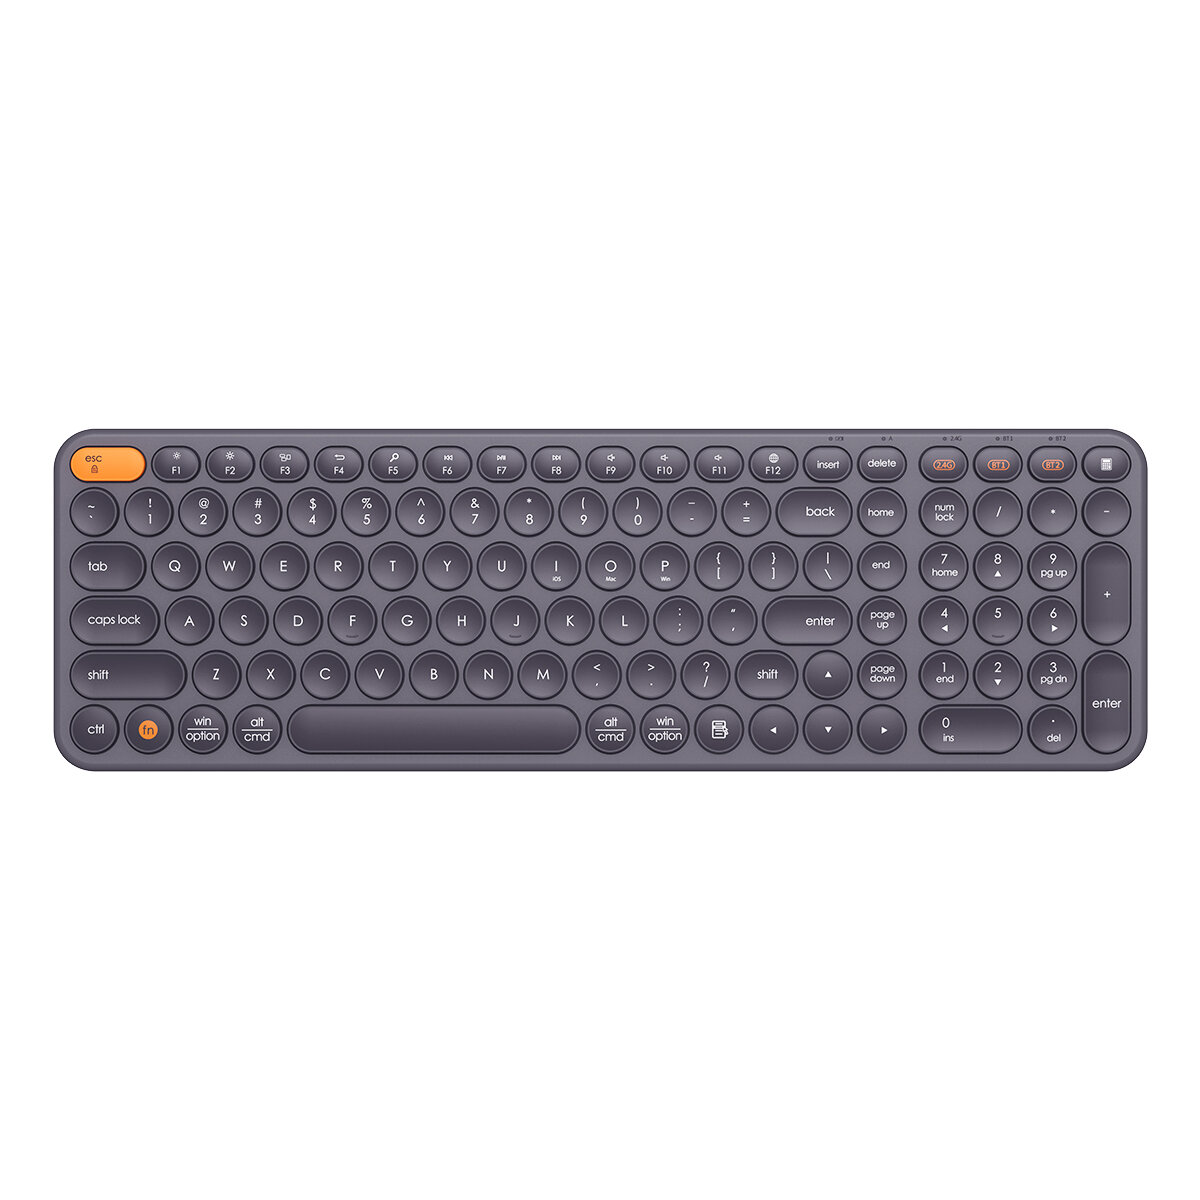 Baseus Bluetooth Wireless Computer Keyboard Multi-Connectionwith High Portability with 2.4GHz USB Nano Receiver Smooth S